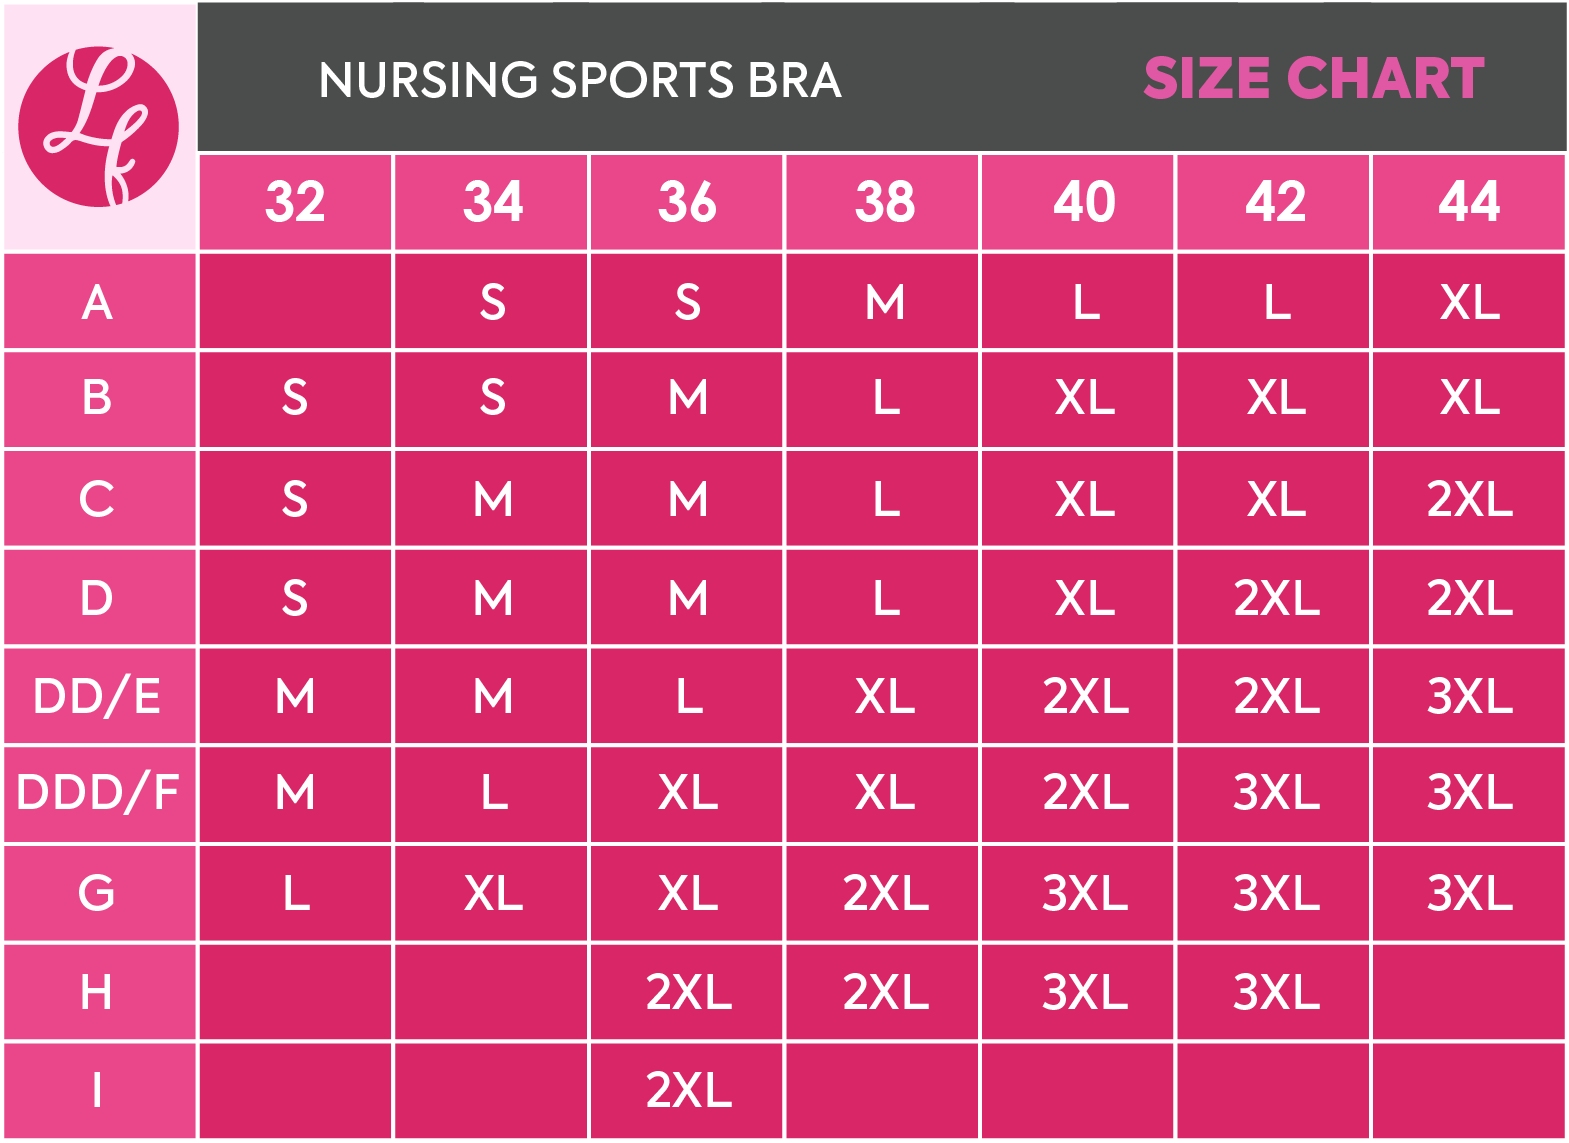 Shapee Luxe Nursing Bra  Subplace: Subscriptions Make Life Easier